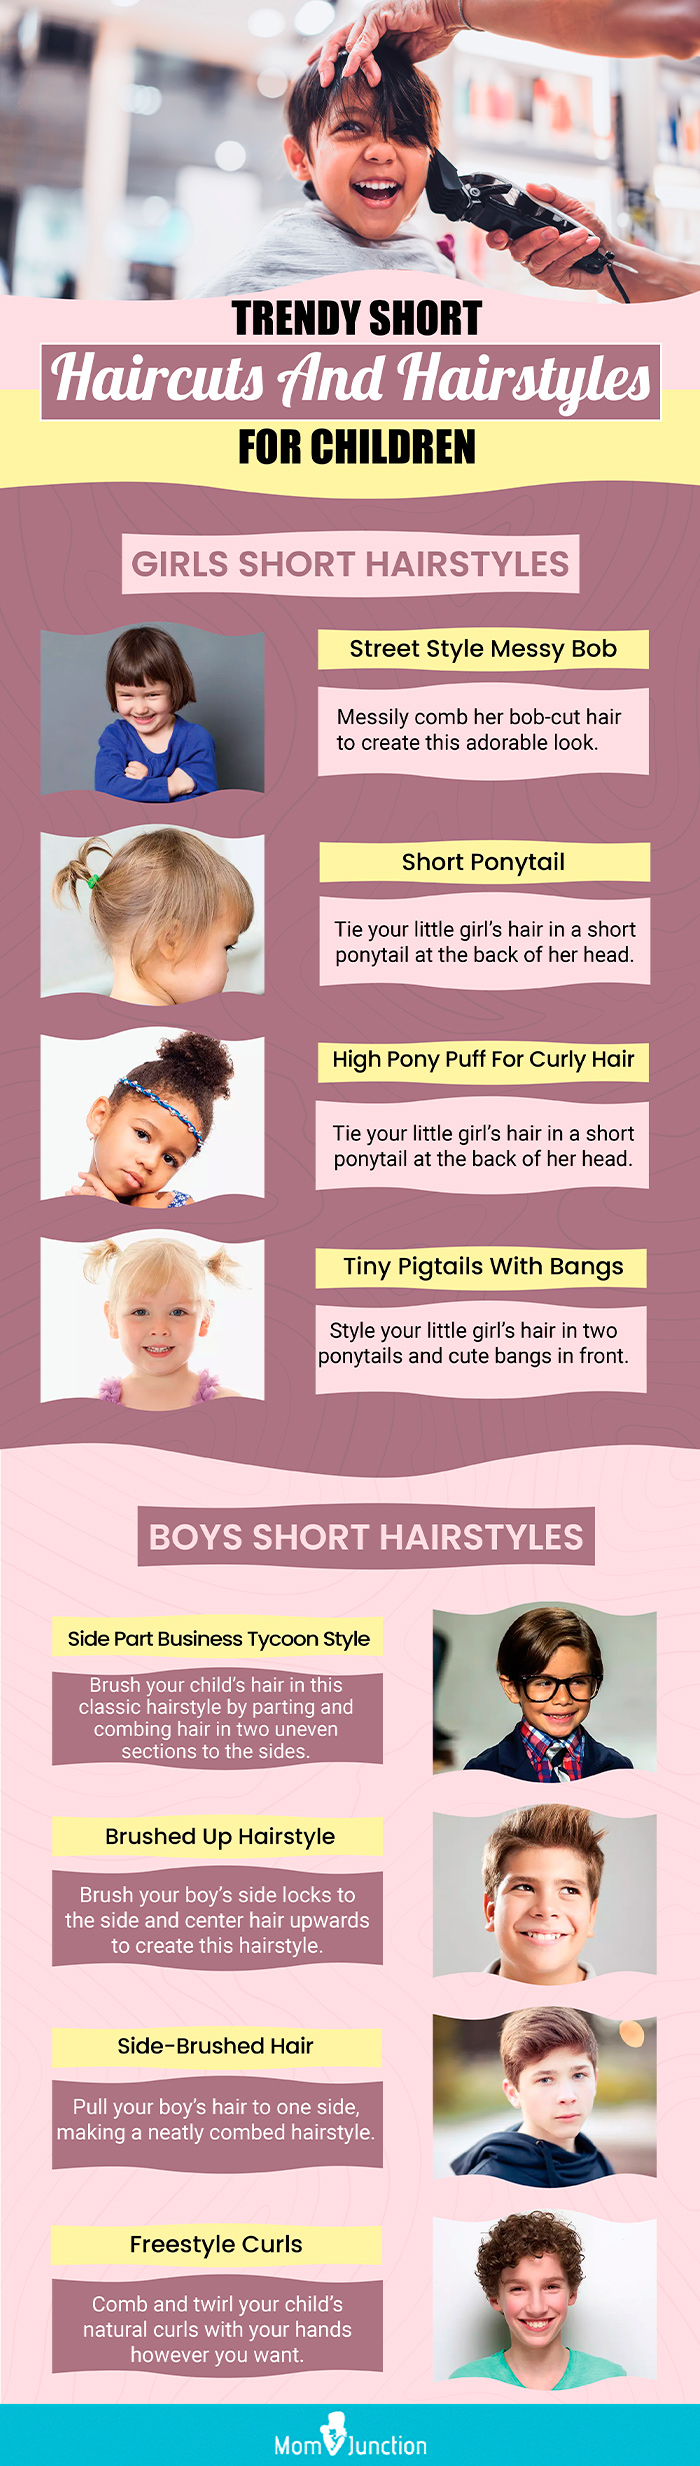 trendy short haircuts and hairstyles for children (infographic)